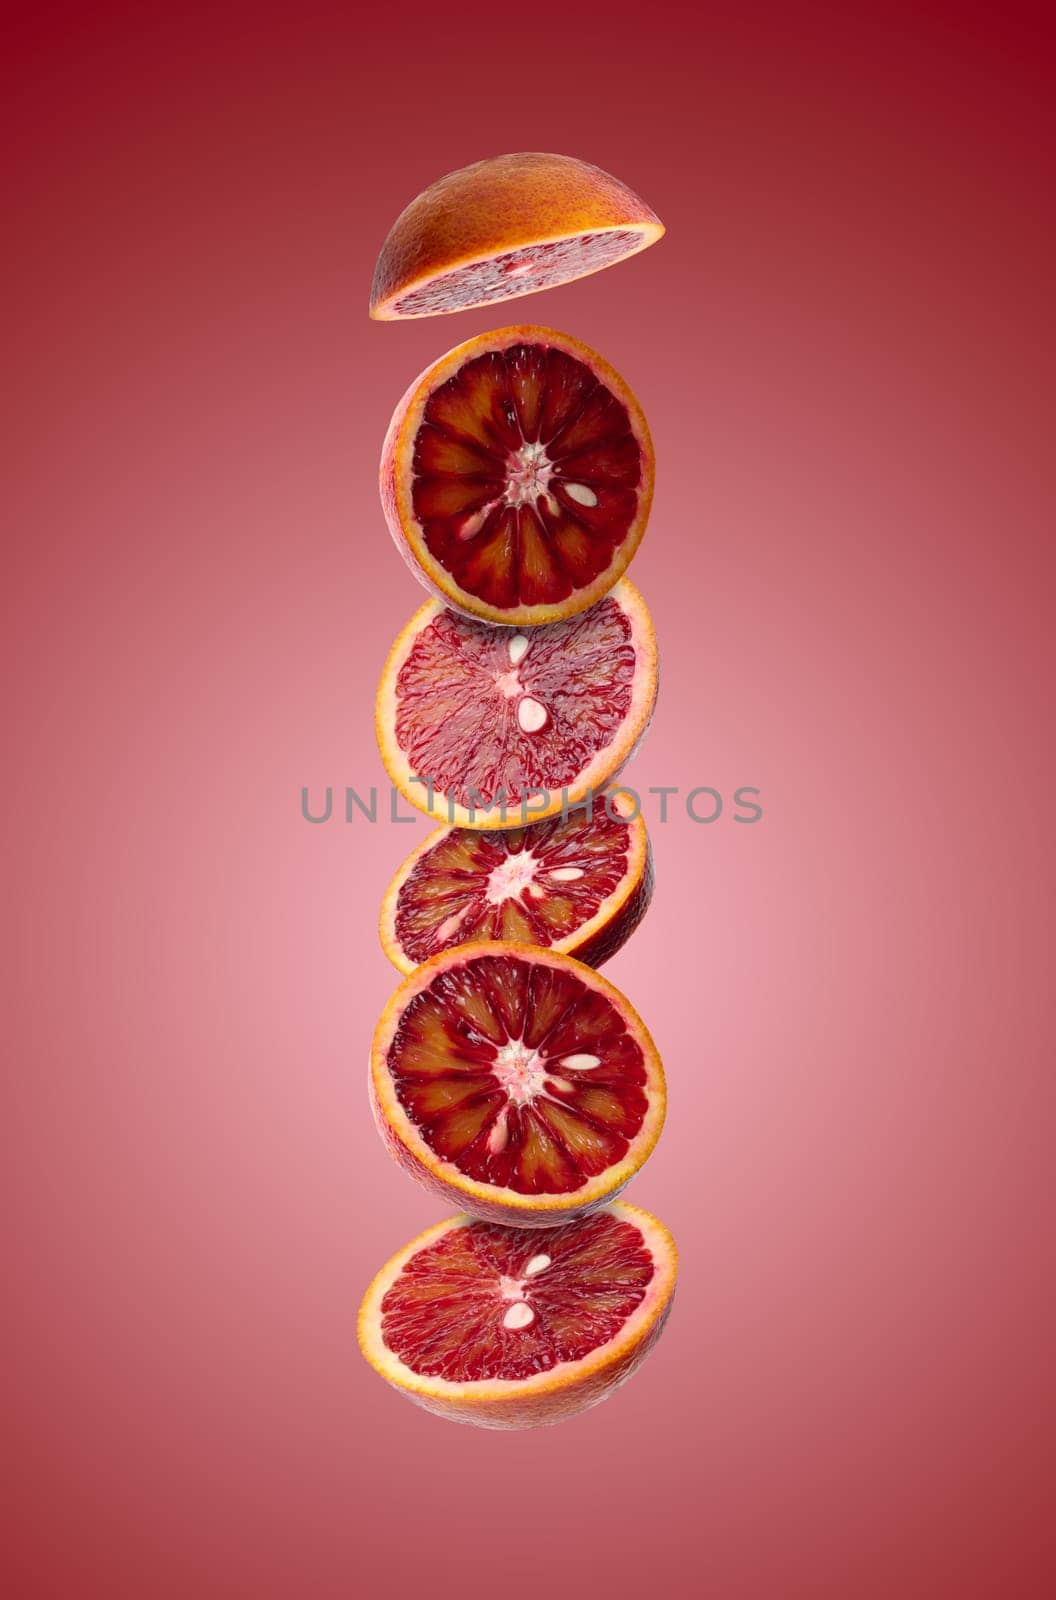 Various pieces of red orange on a red background. Fruit slices levitate